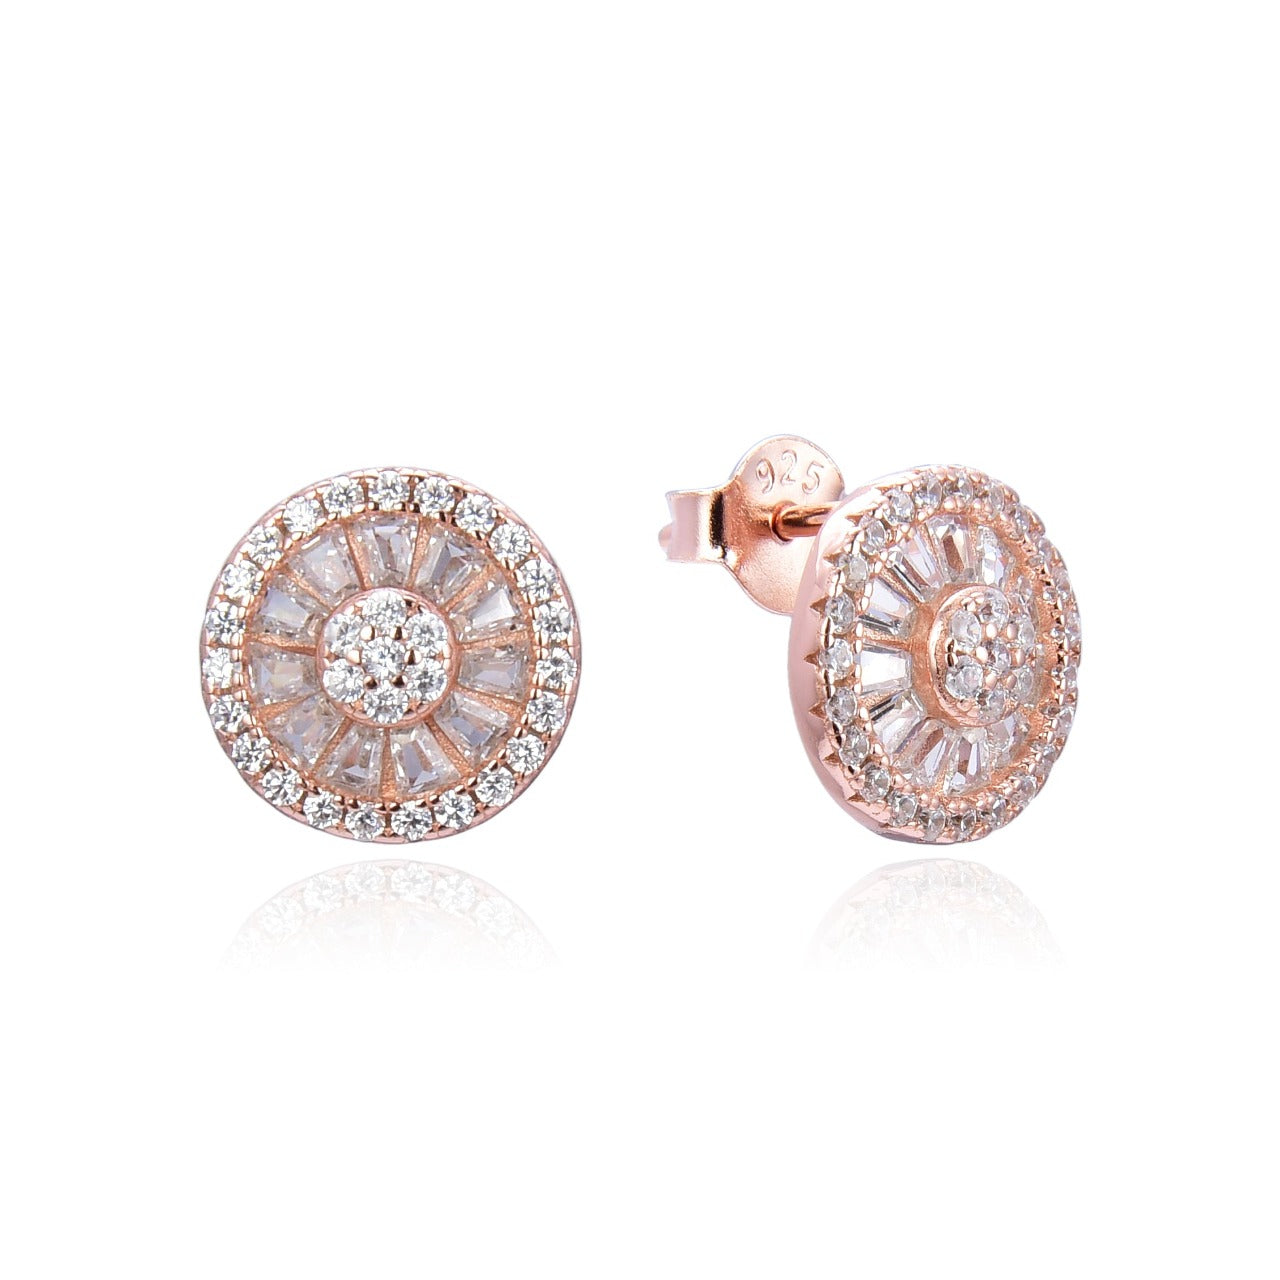 Kilkenny Silver Rose Gold Rosette Stud Earrings  Rose gold plated sterling silver rosette style stud earrings with cubic zirconia stones.